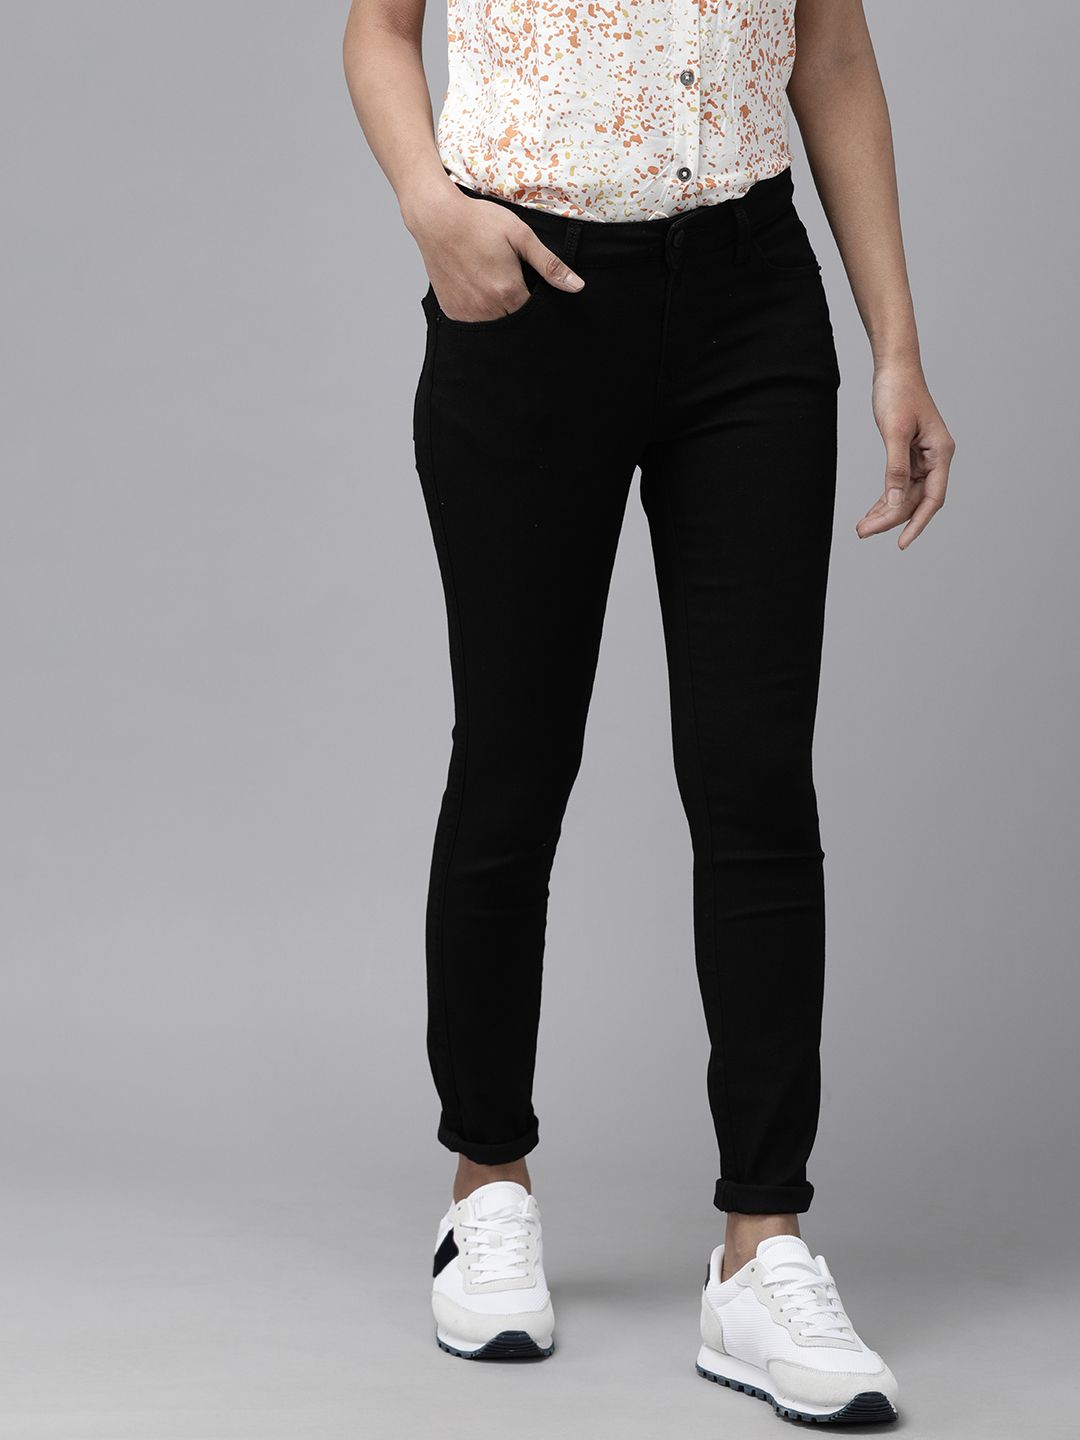 Vero Moda Women Black Skinny Fit Clean look Mid Rise No Fade Stretchable Jeans Price in India